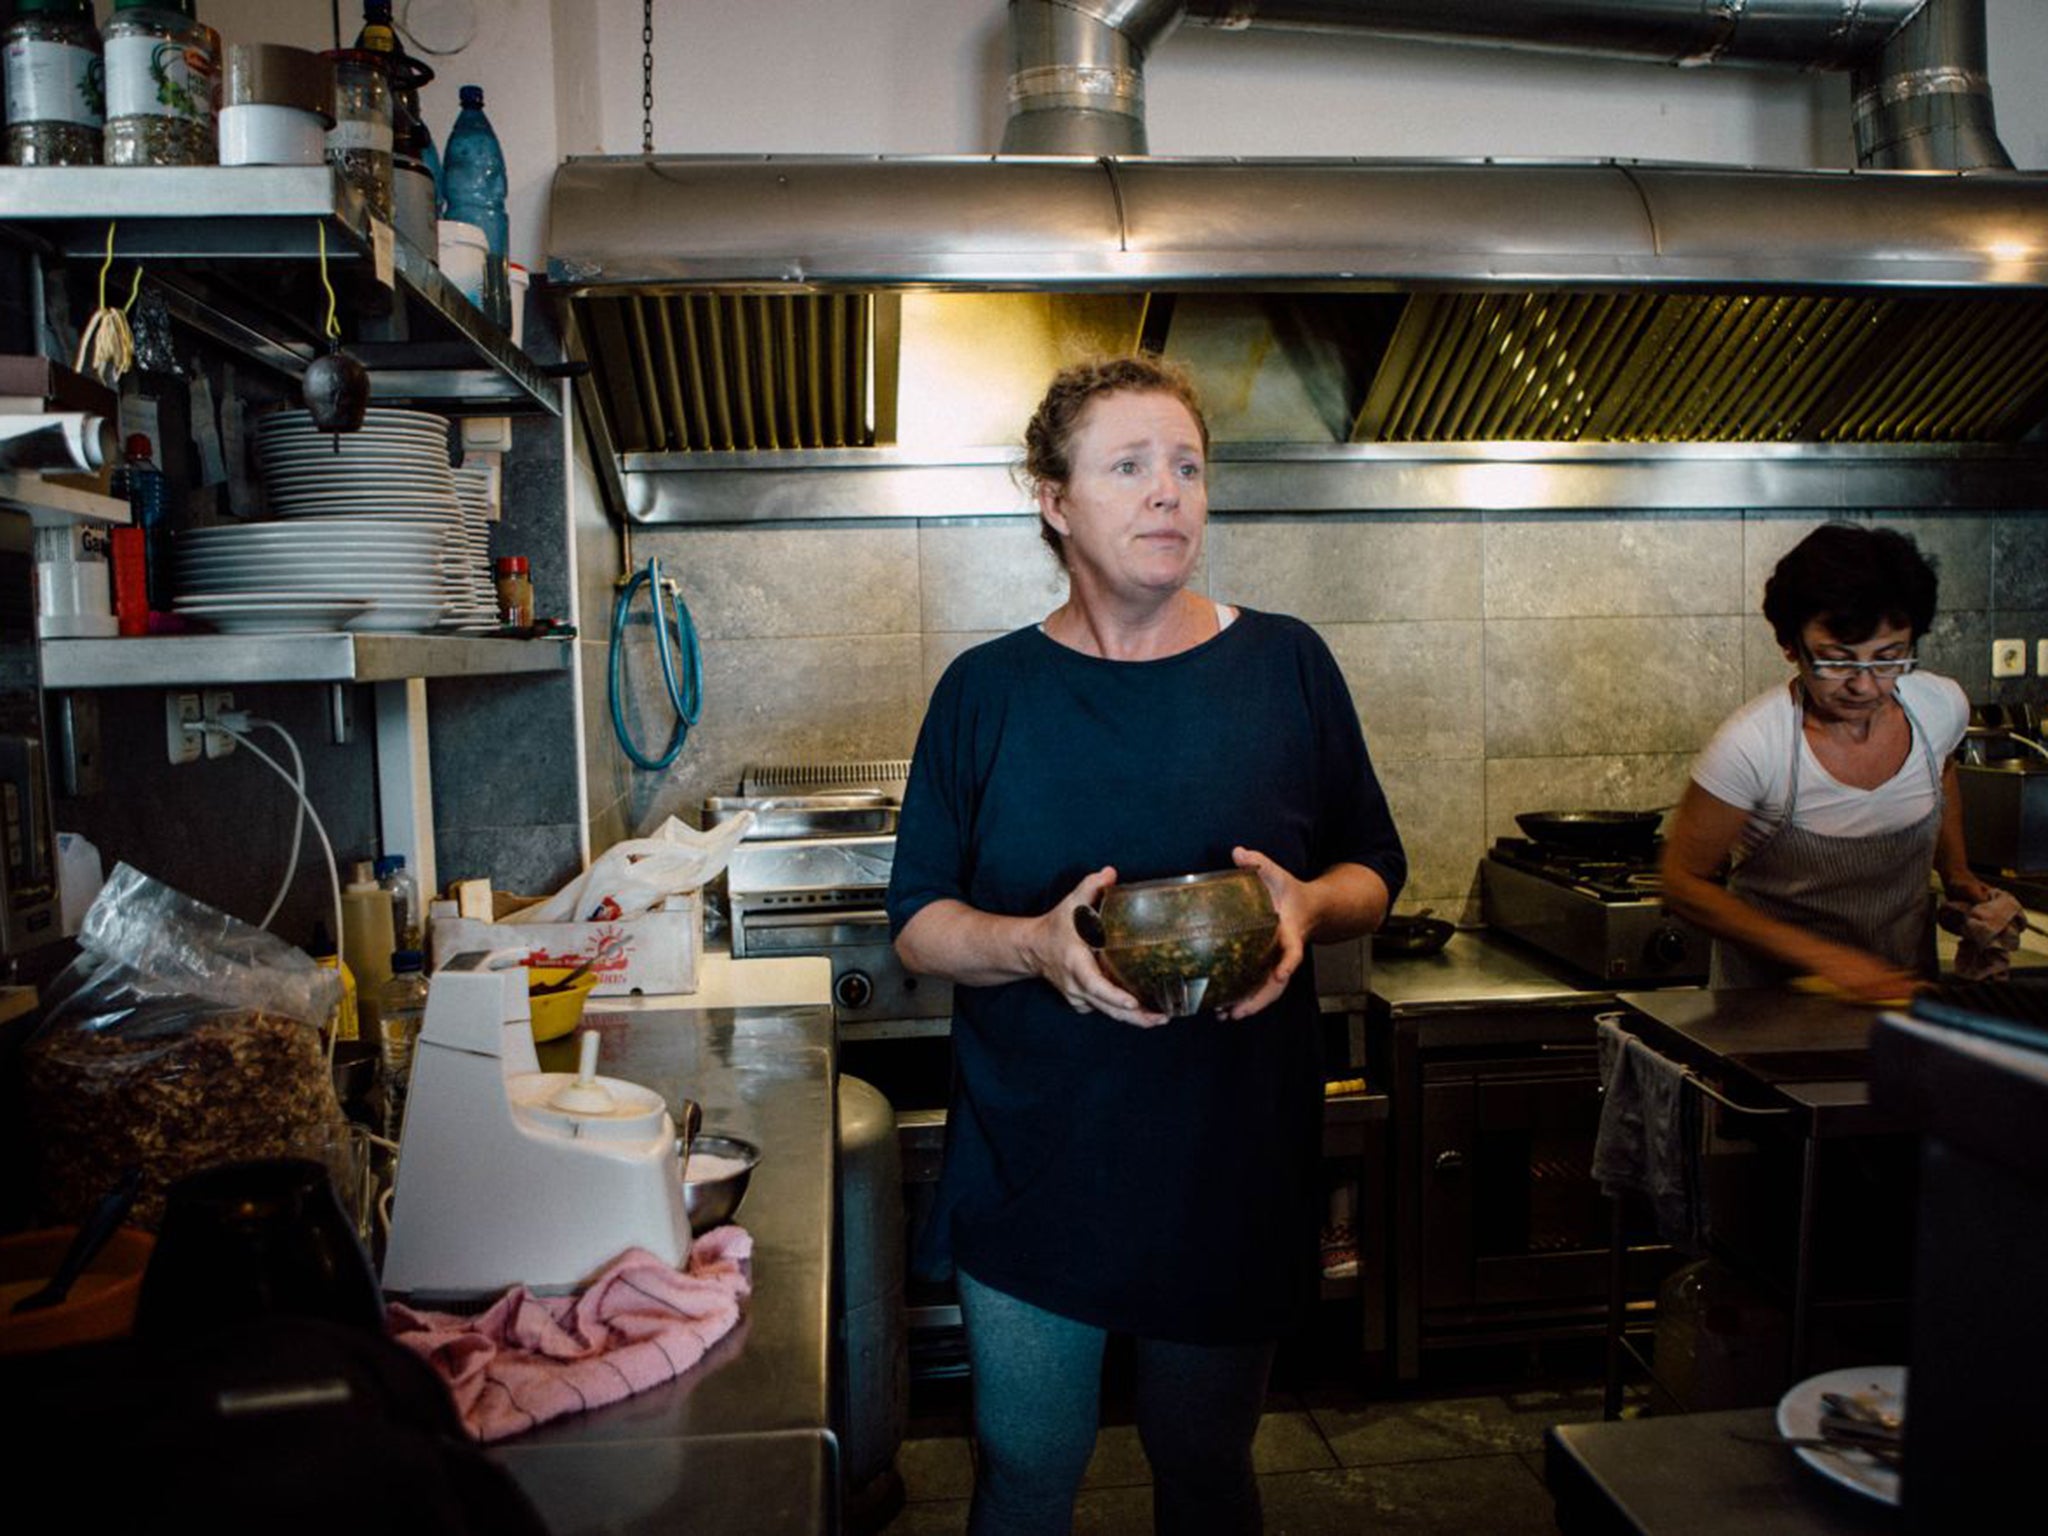 Melinda McRostie has been feeding refugees at her Lesbos restaurant, The Captain’s Table